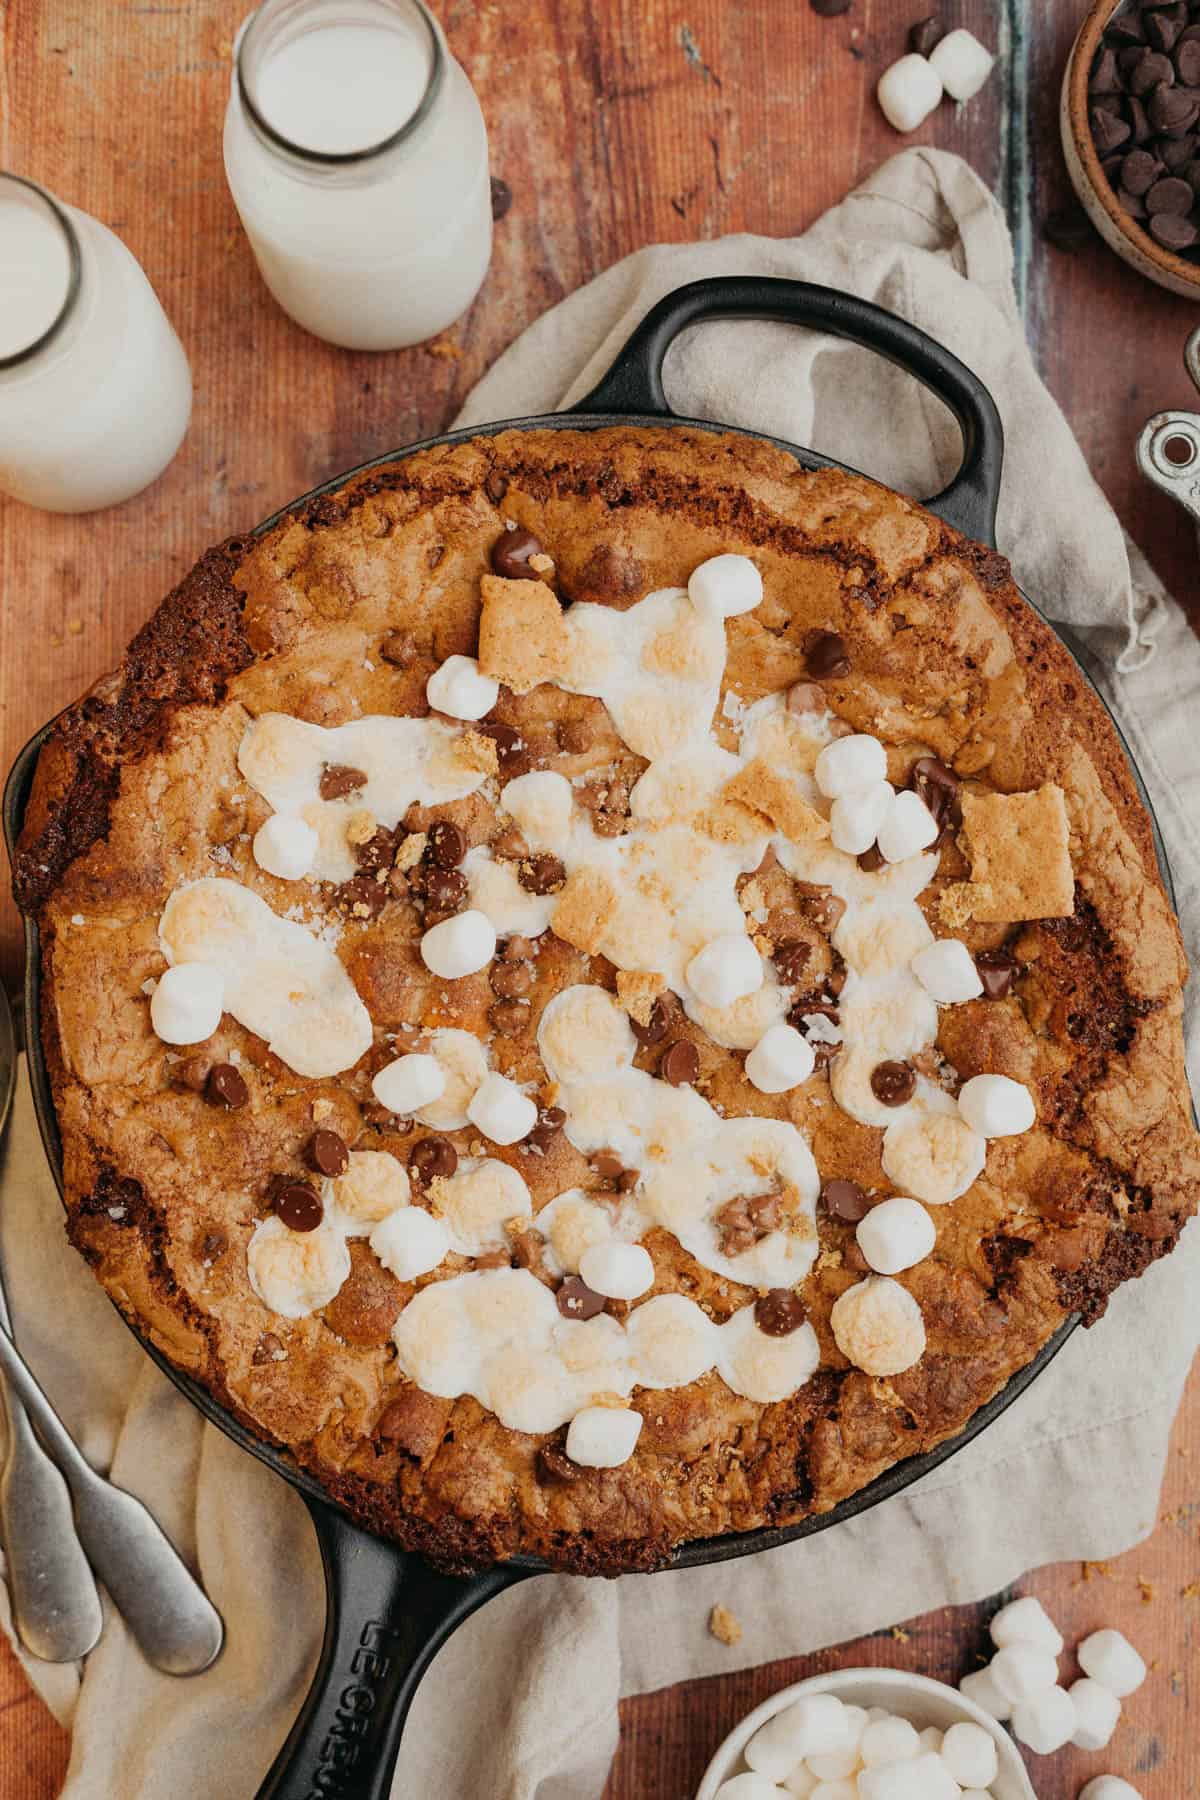 A marshmallow chocolate chip cookie skillet in a cast iron pan on a wooden surface.